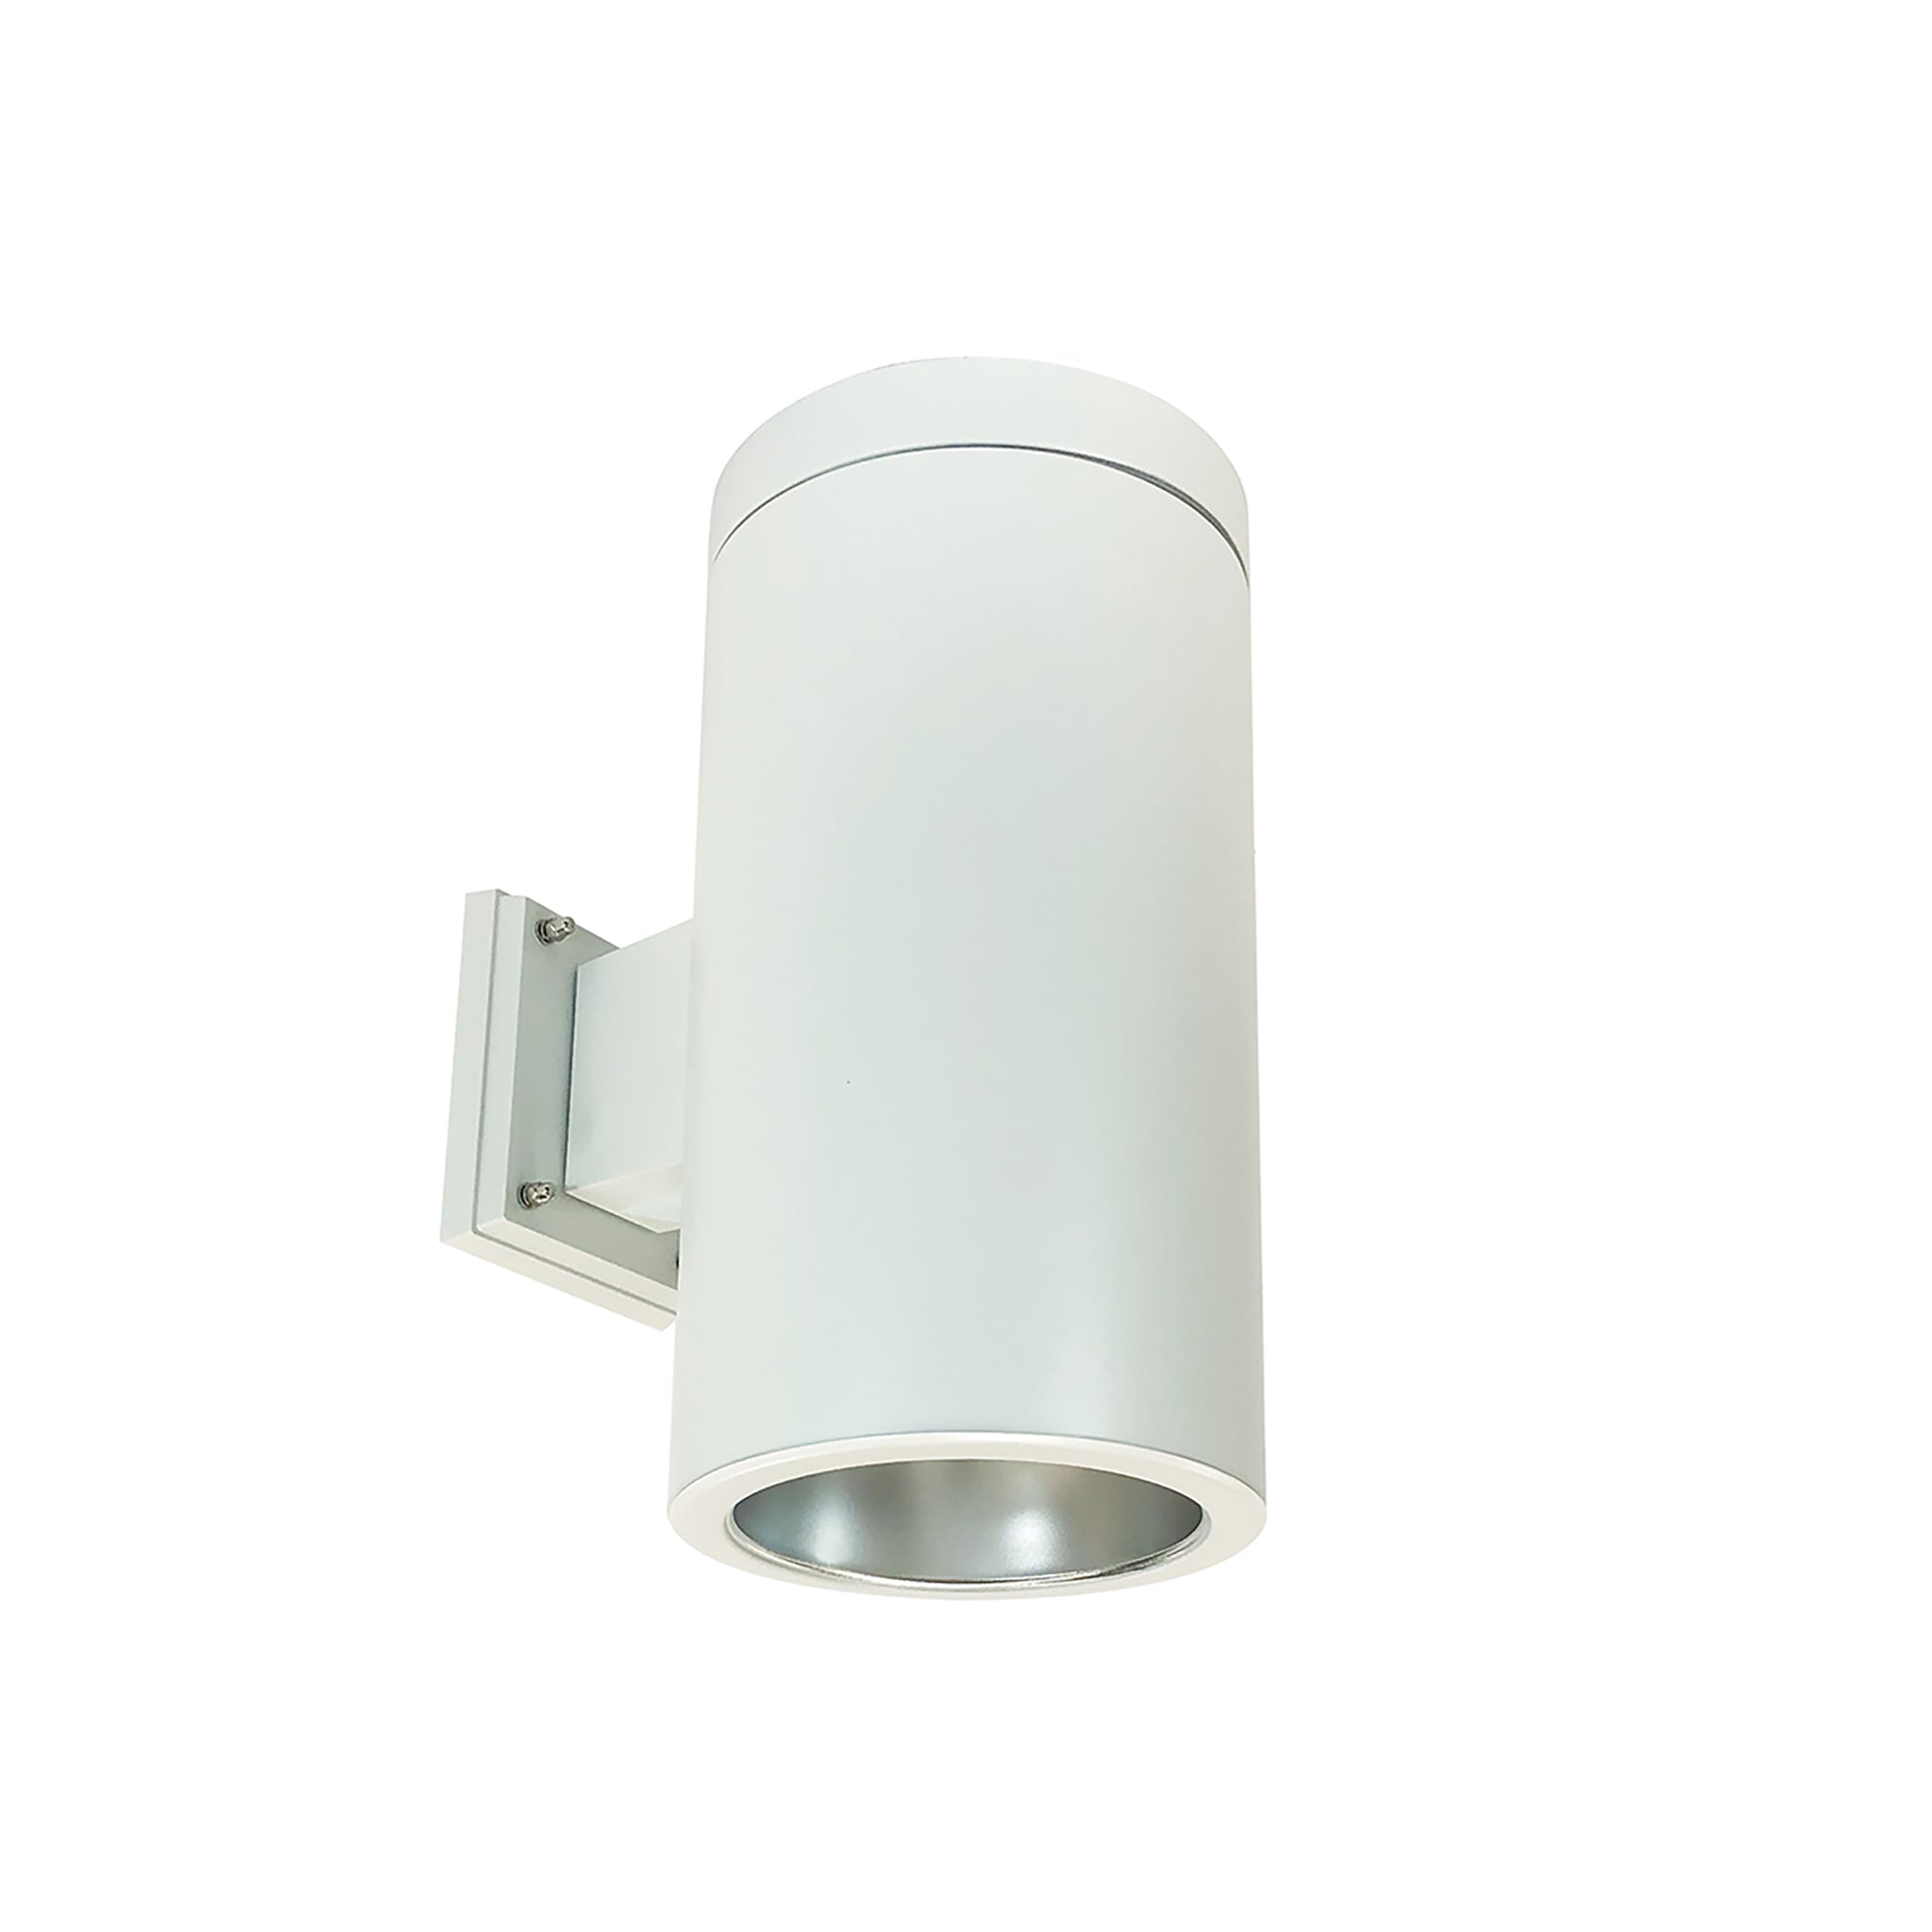 Nora Lighting NYLS2-6W25140FDWW6/PEM - Cylinder - 6 Inch CYL WALL MNT 2500L 40K REF. FLOOD . DIFF/WH FLANGE 120-277V WH CYL, WIRED FOR EM